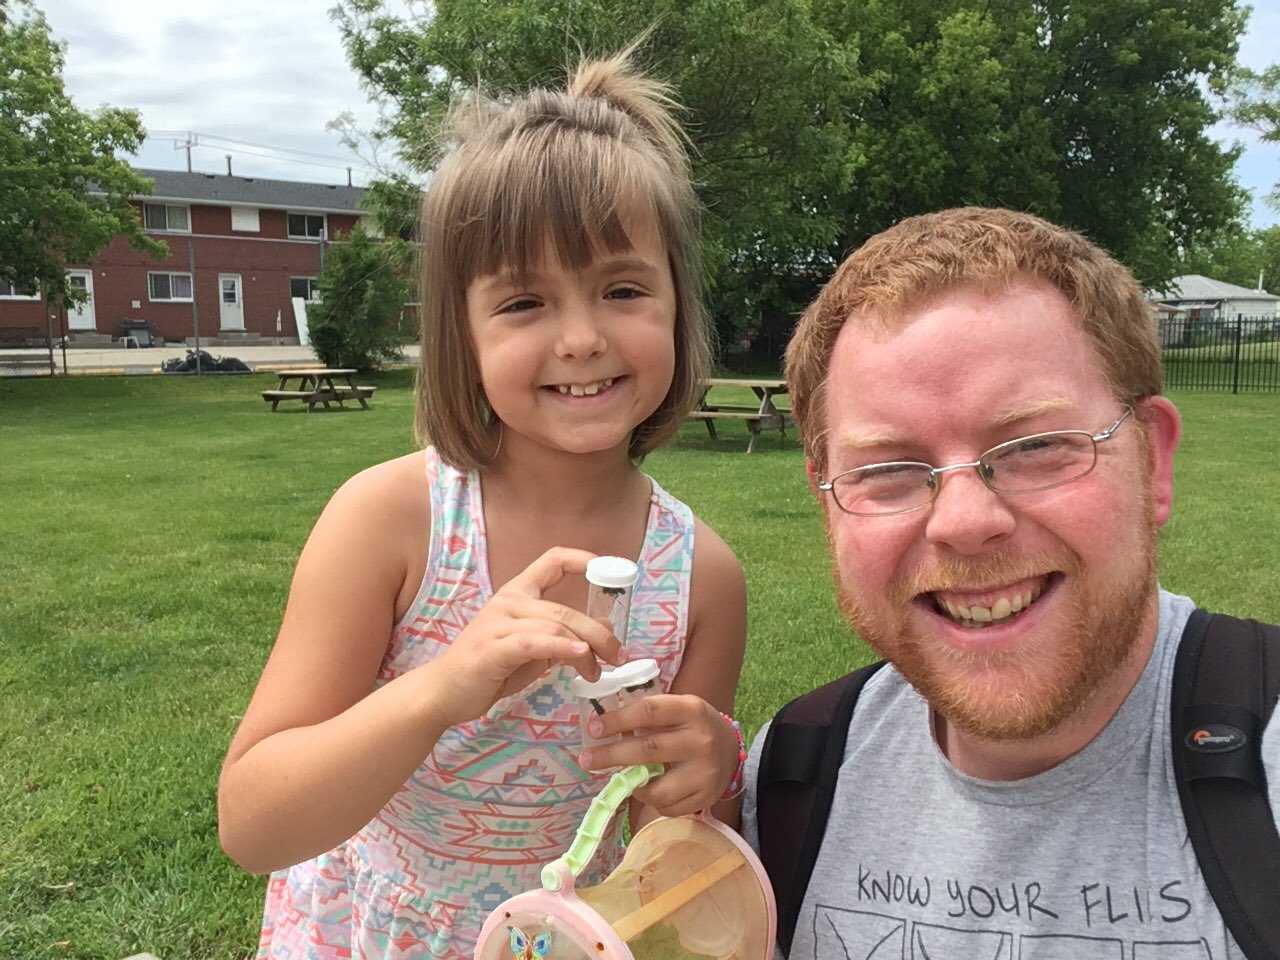 An 8-year-old girl, bullied for loving bugs, just got published in a scientific journal